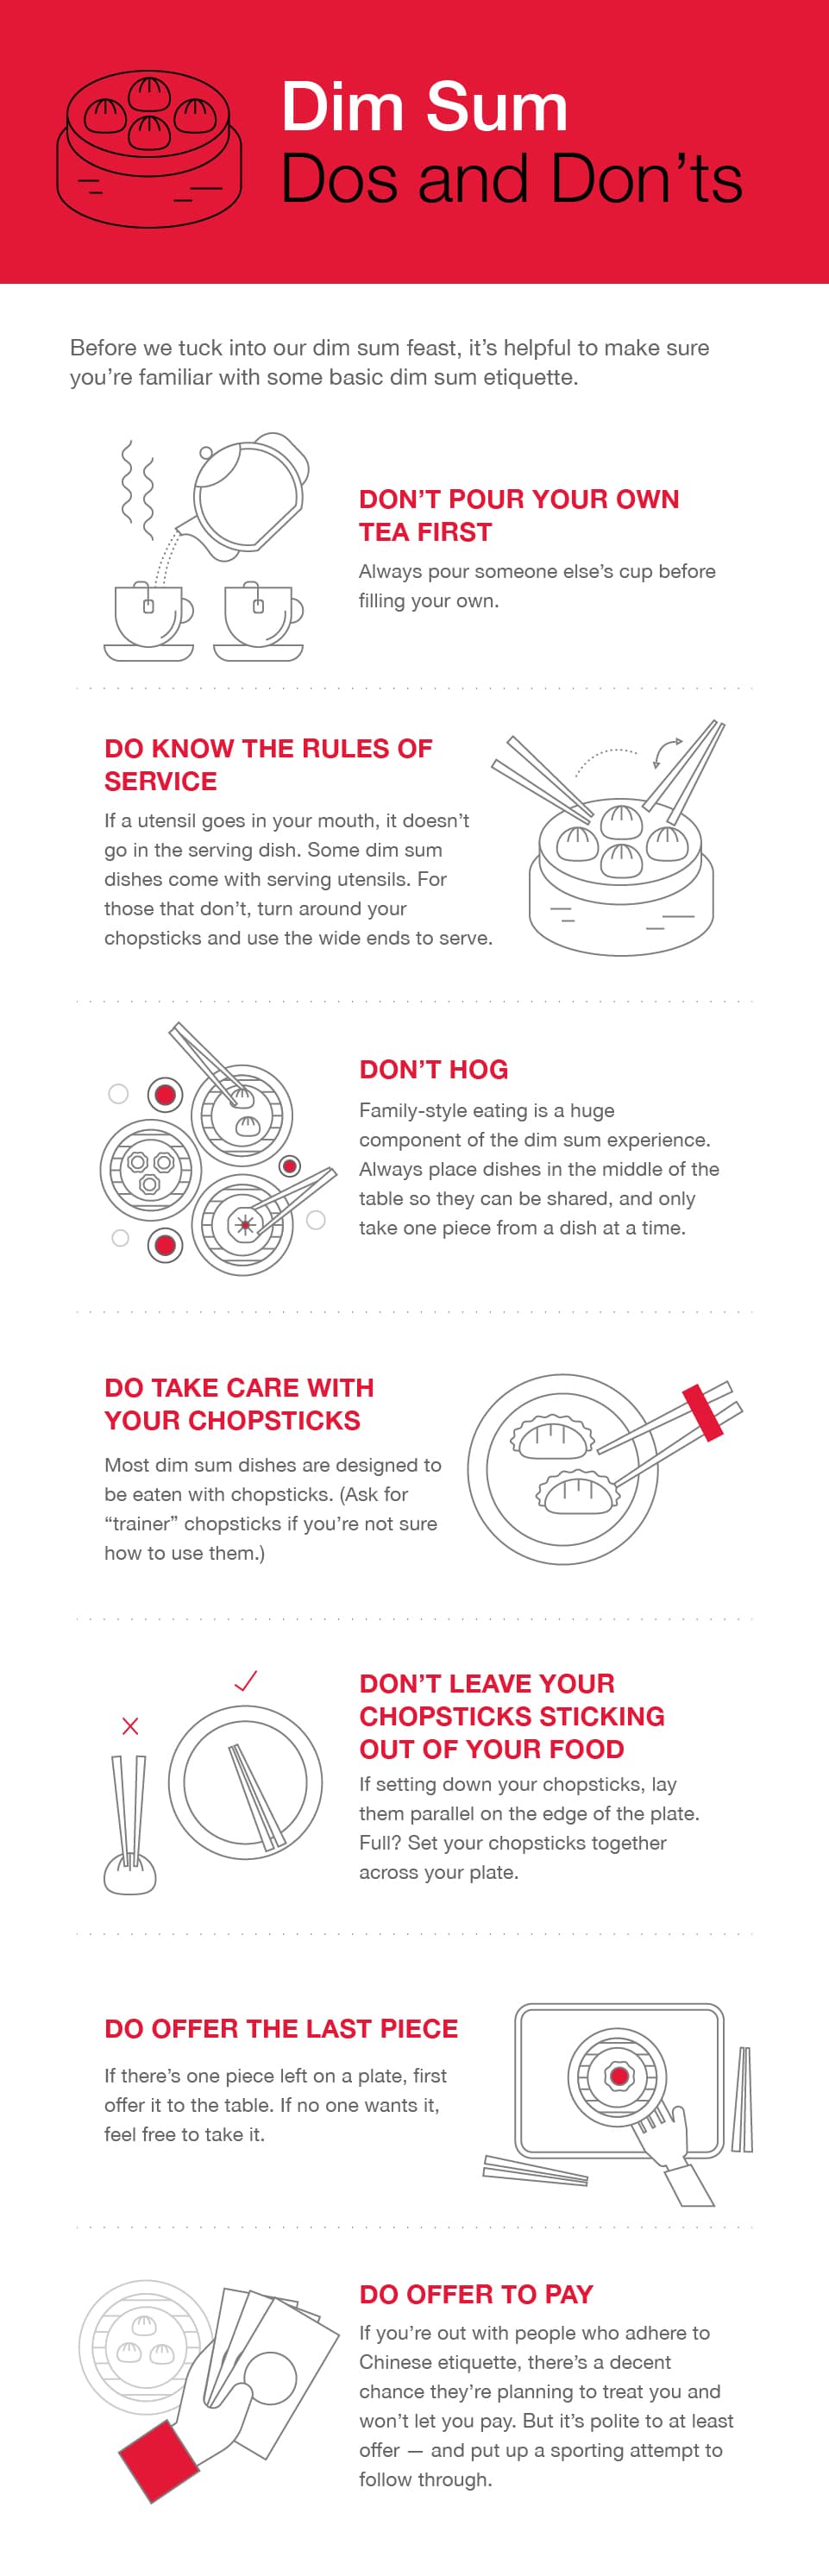 Dim Sum Dos and Don'ts